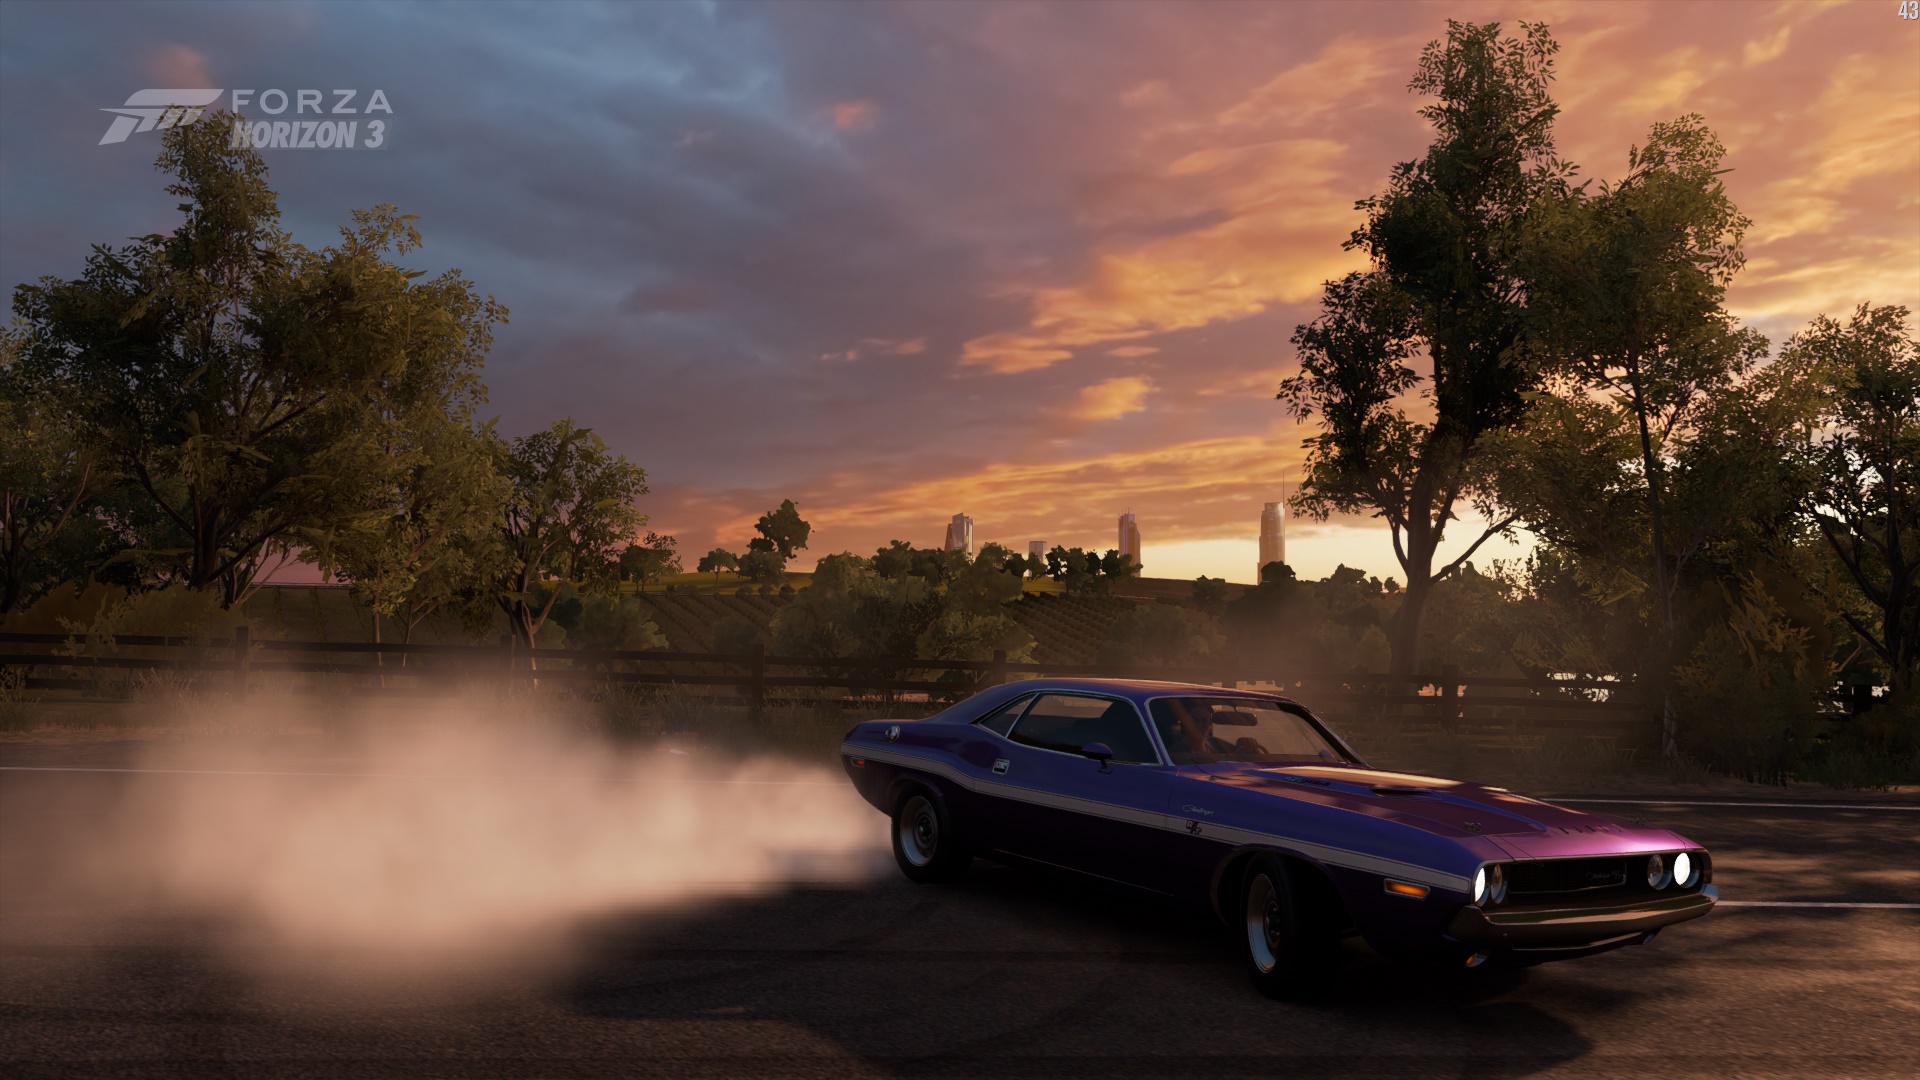 General 1920x1080 Forza Horizon 3 Dodge Challenger video games drift pony cars car purple cars vehicle screen shot Dodge muscle cars American cars PlaygroundGames